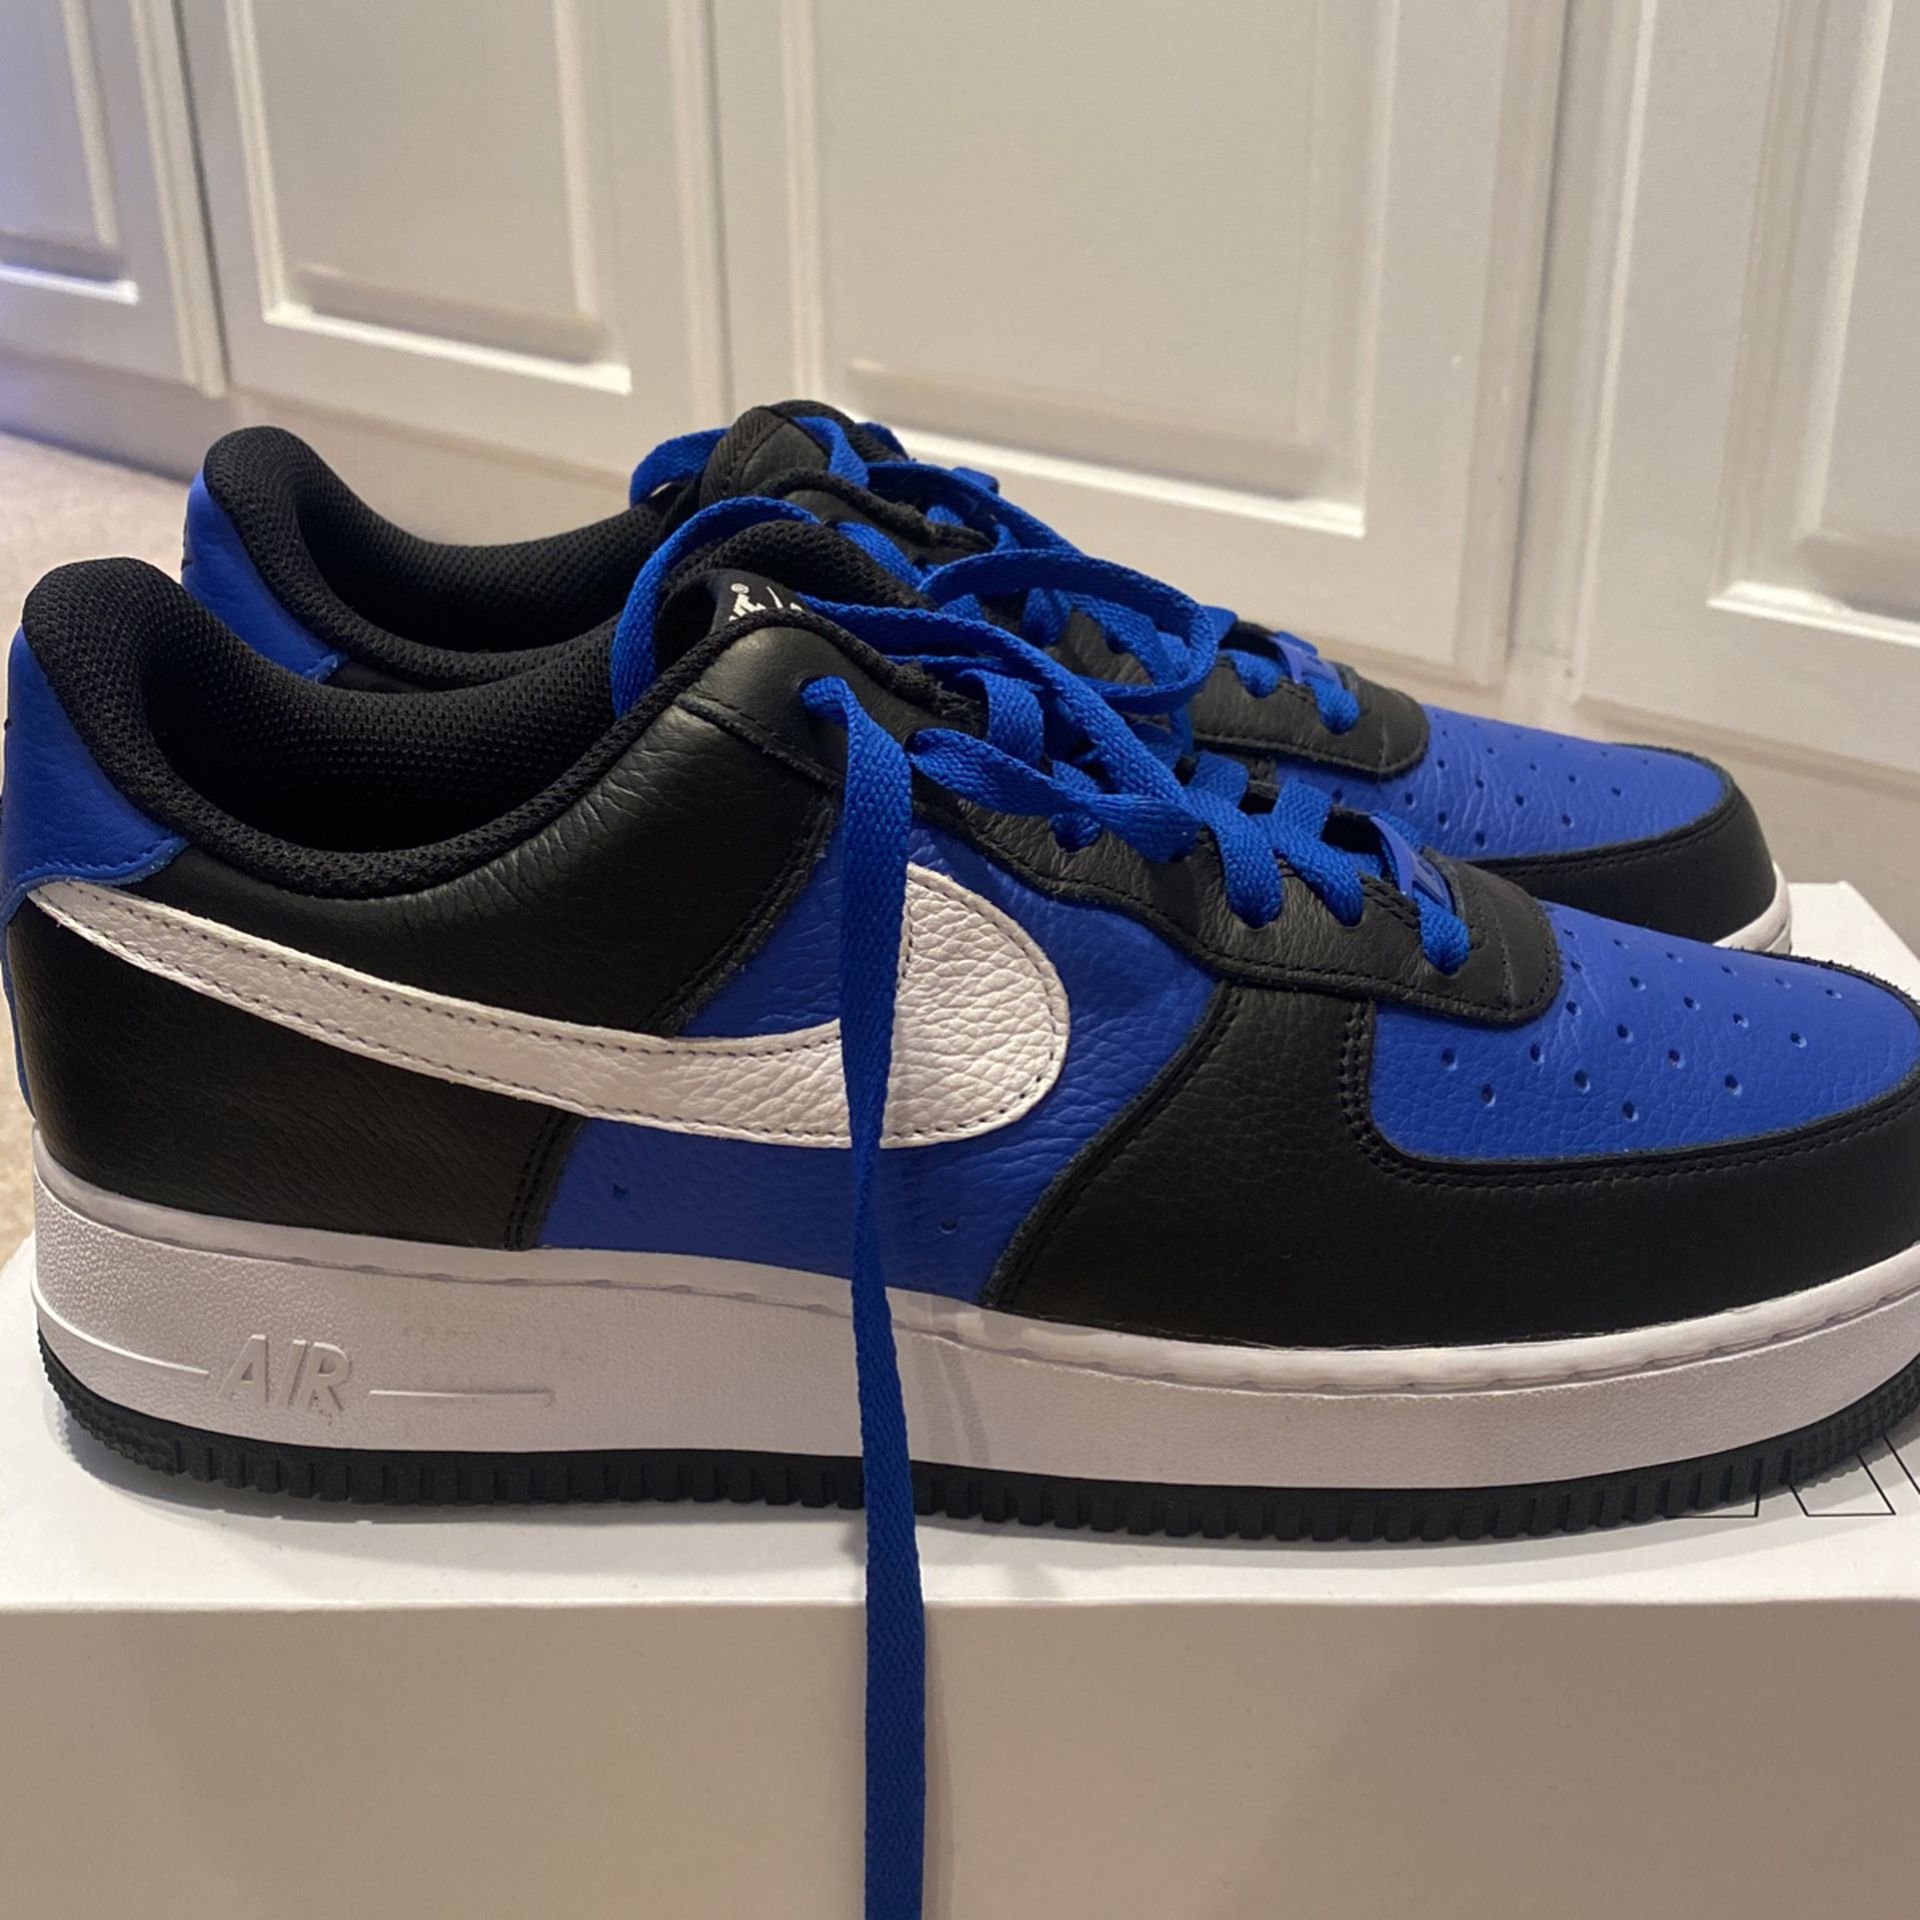 Nike Air Force 1s Champion Ship 1s Lv.7 for Sale in Lynn, MA - OfferUp